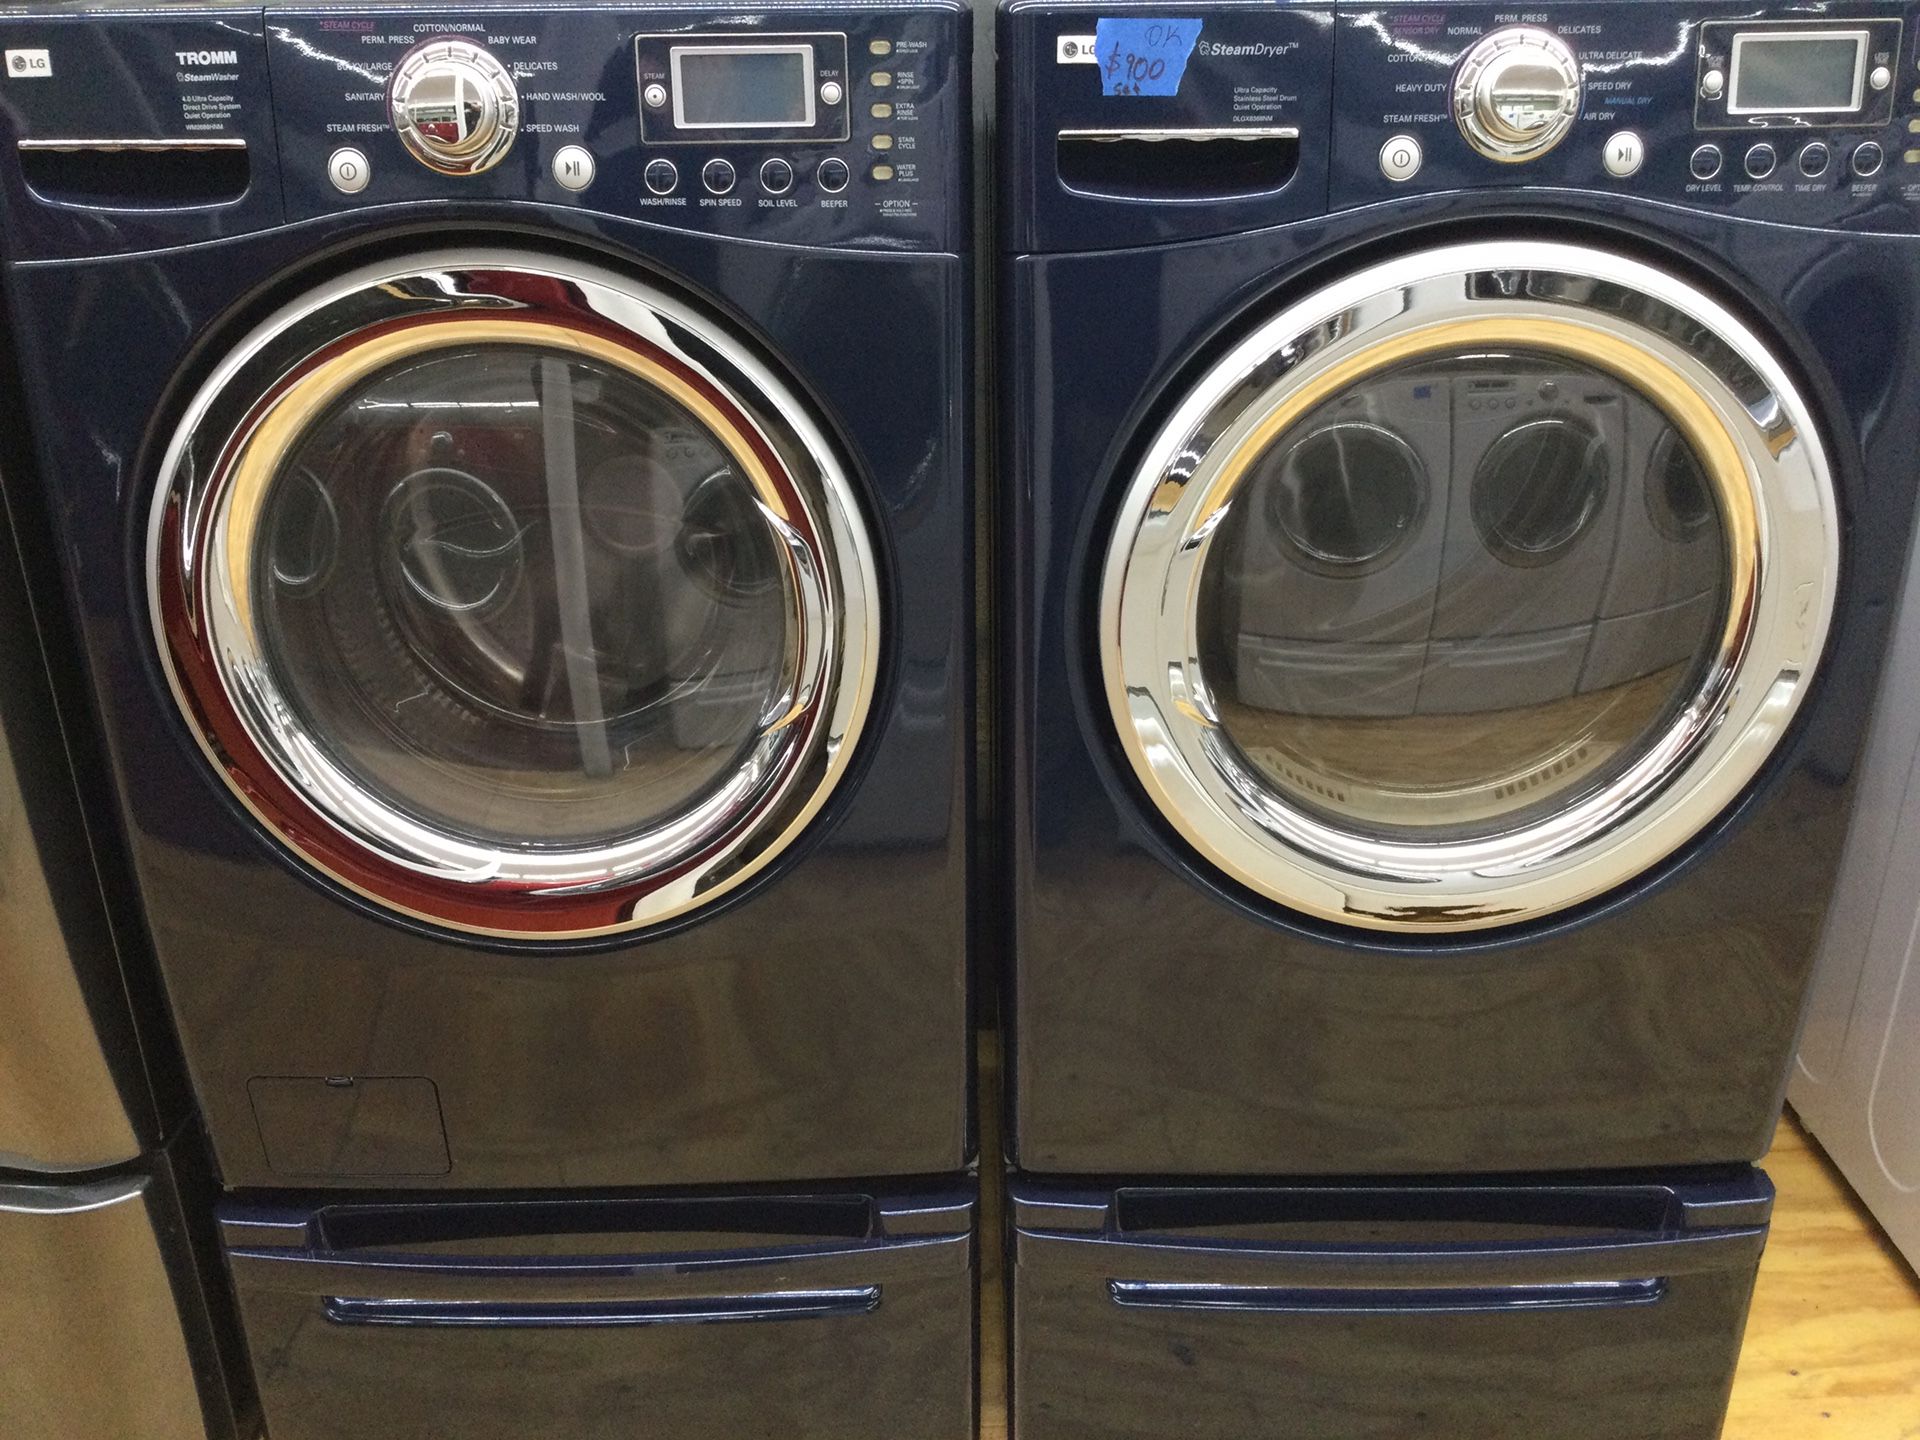 LG blue washer and dryer set